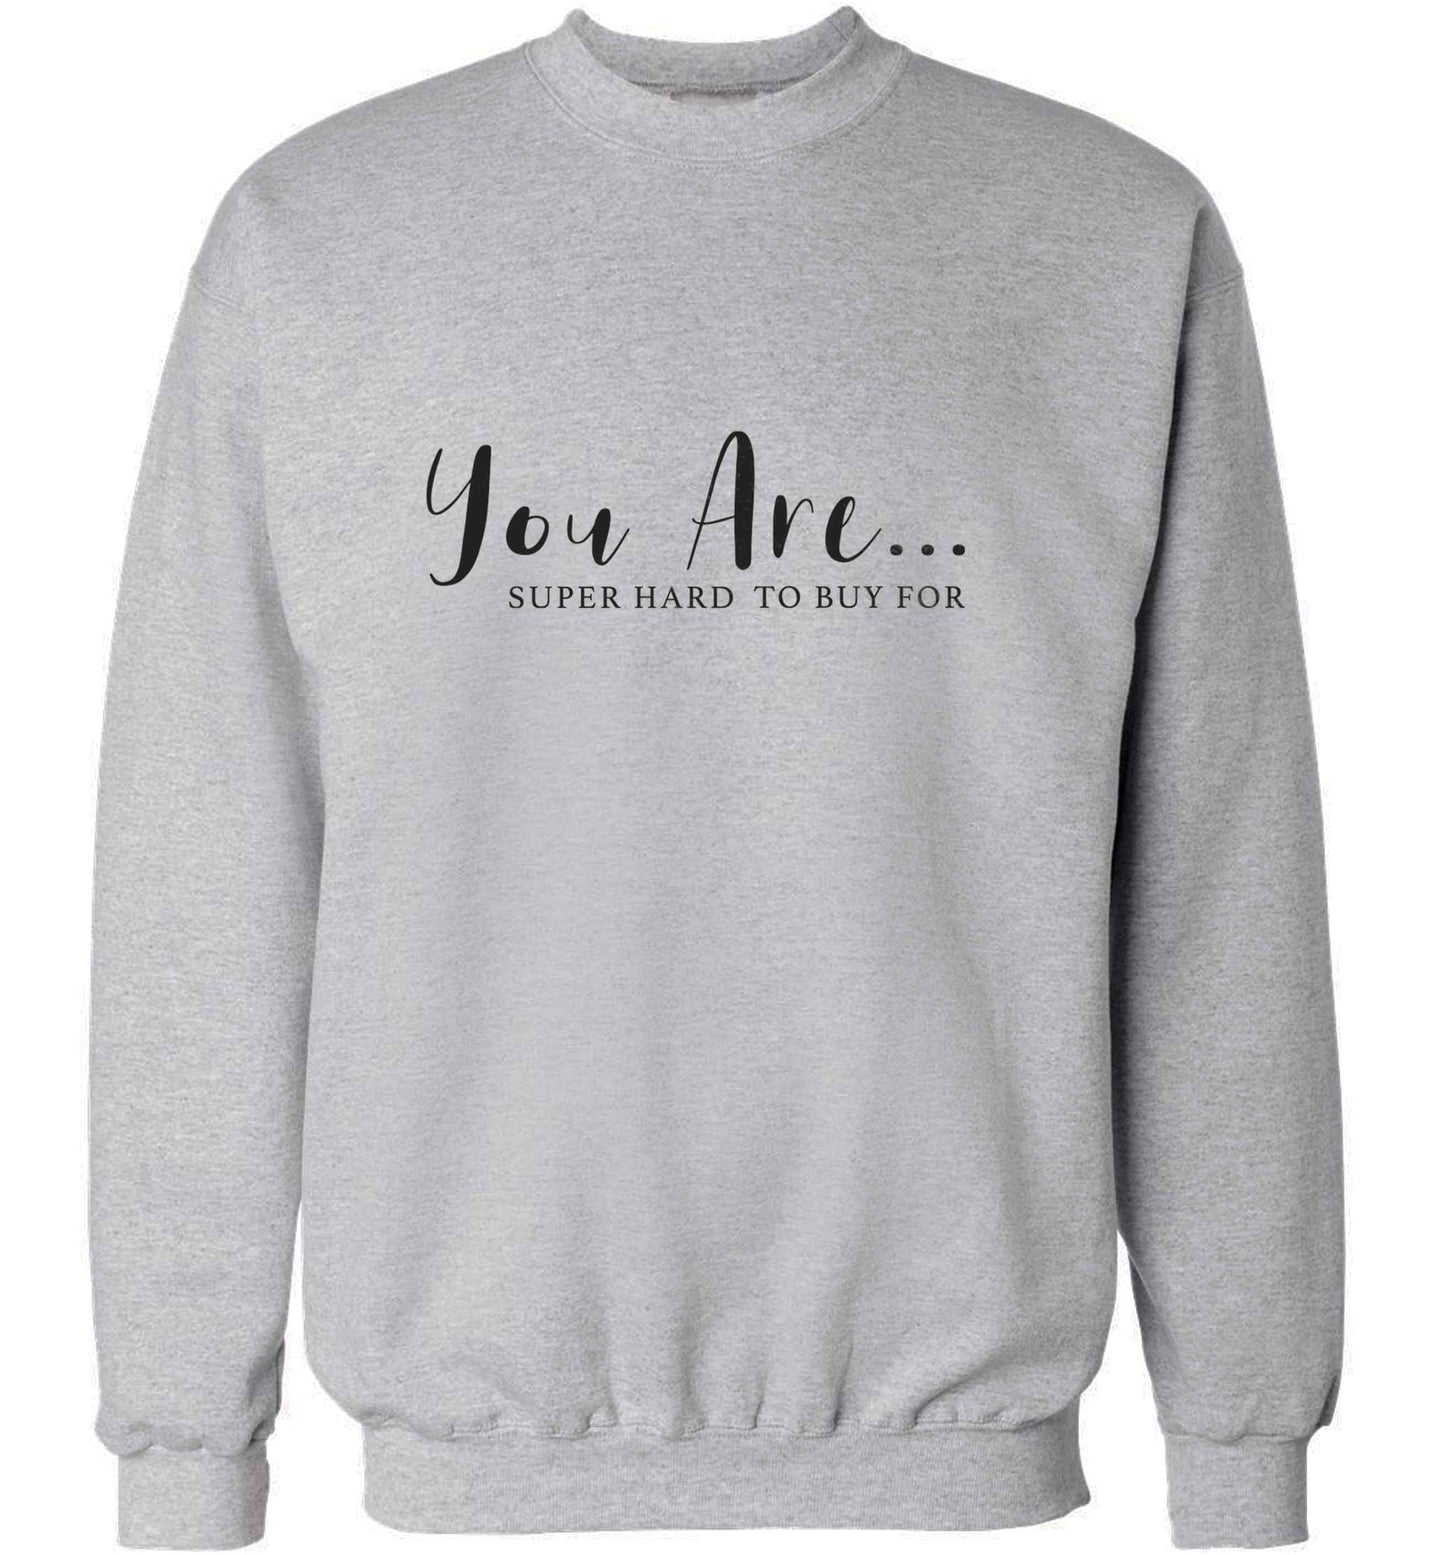 You are super hard to buy for adult's unisex grey sweater 2XL